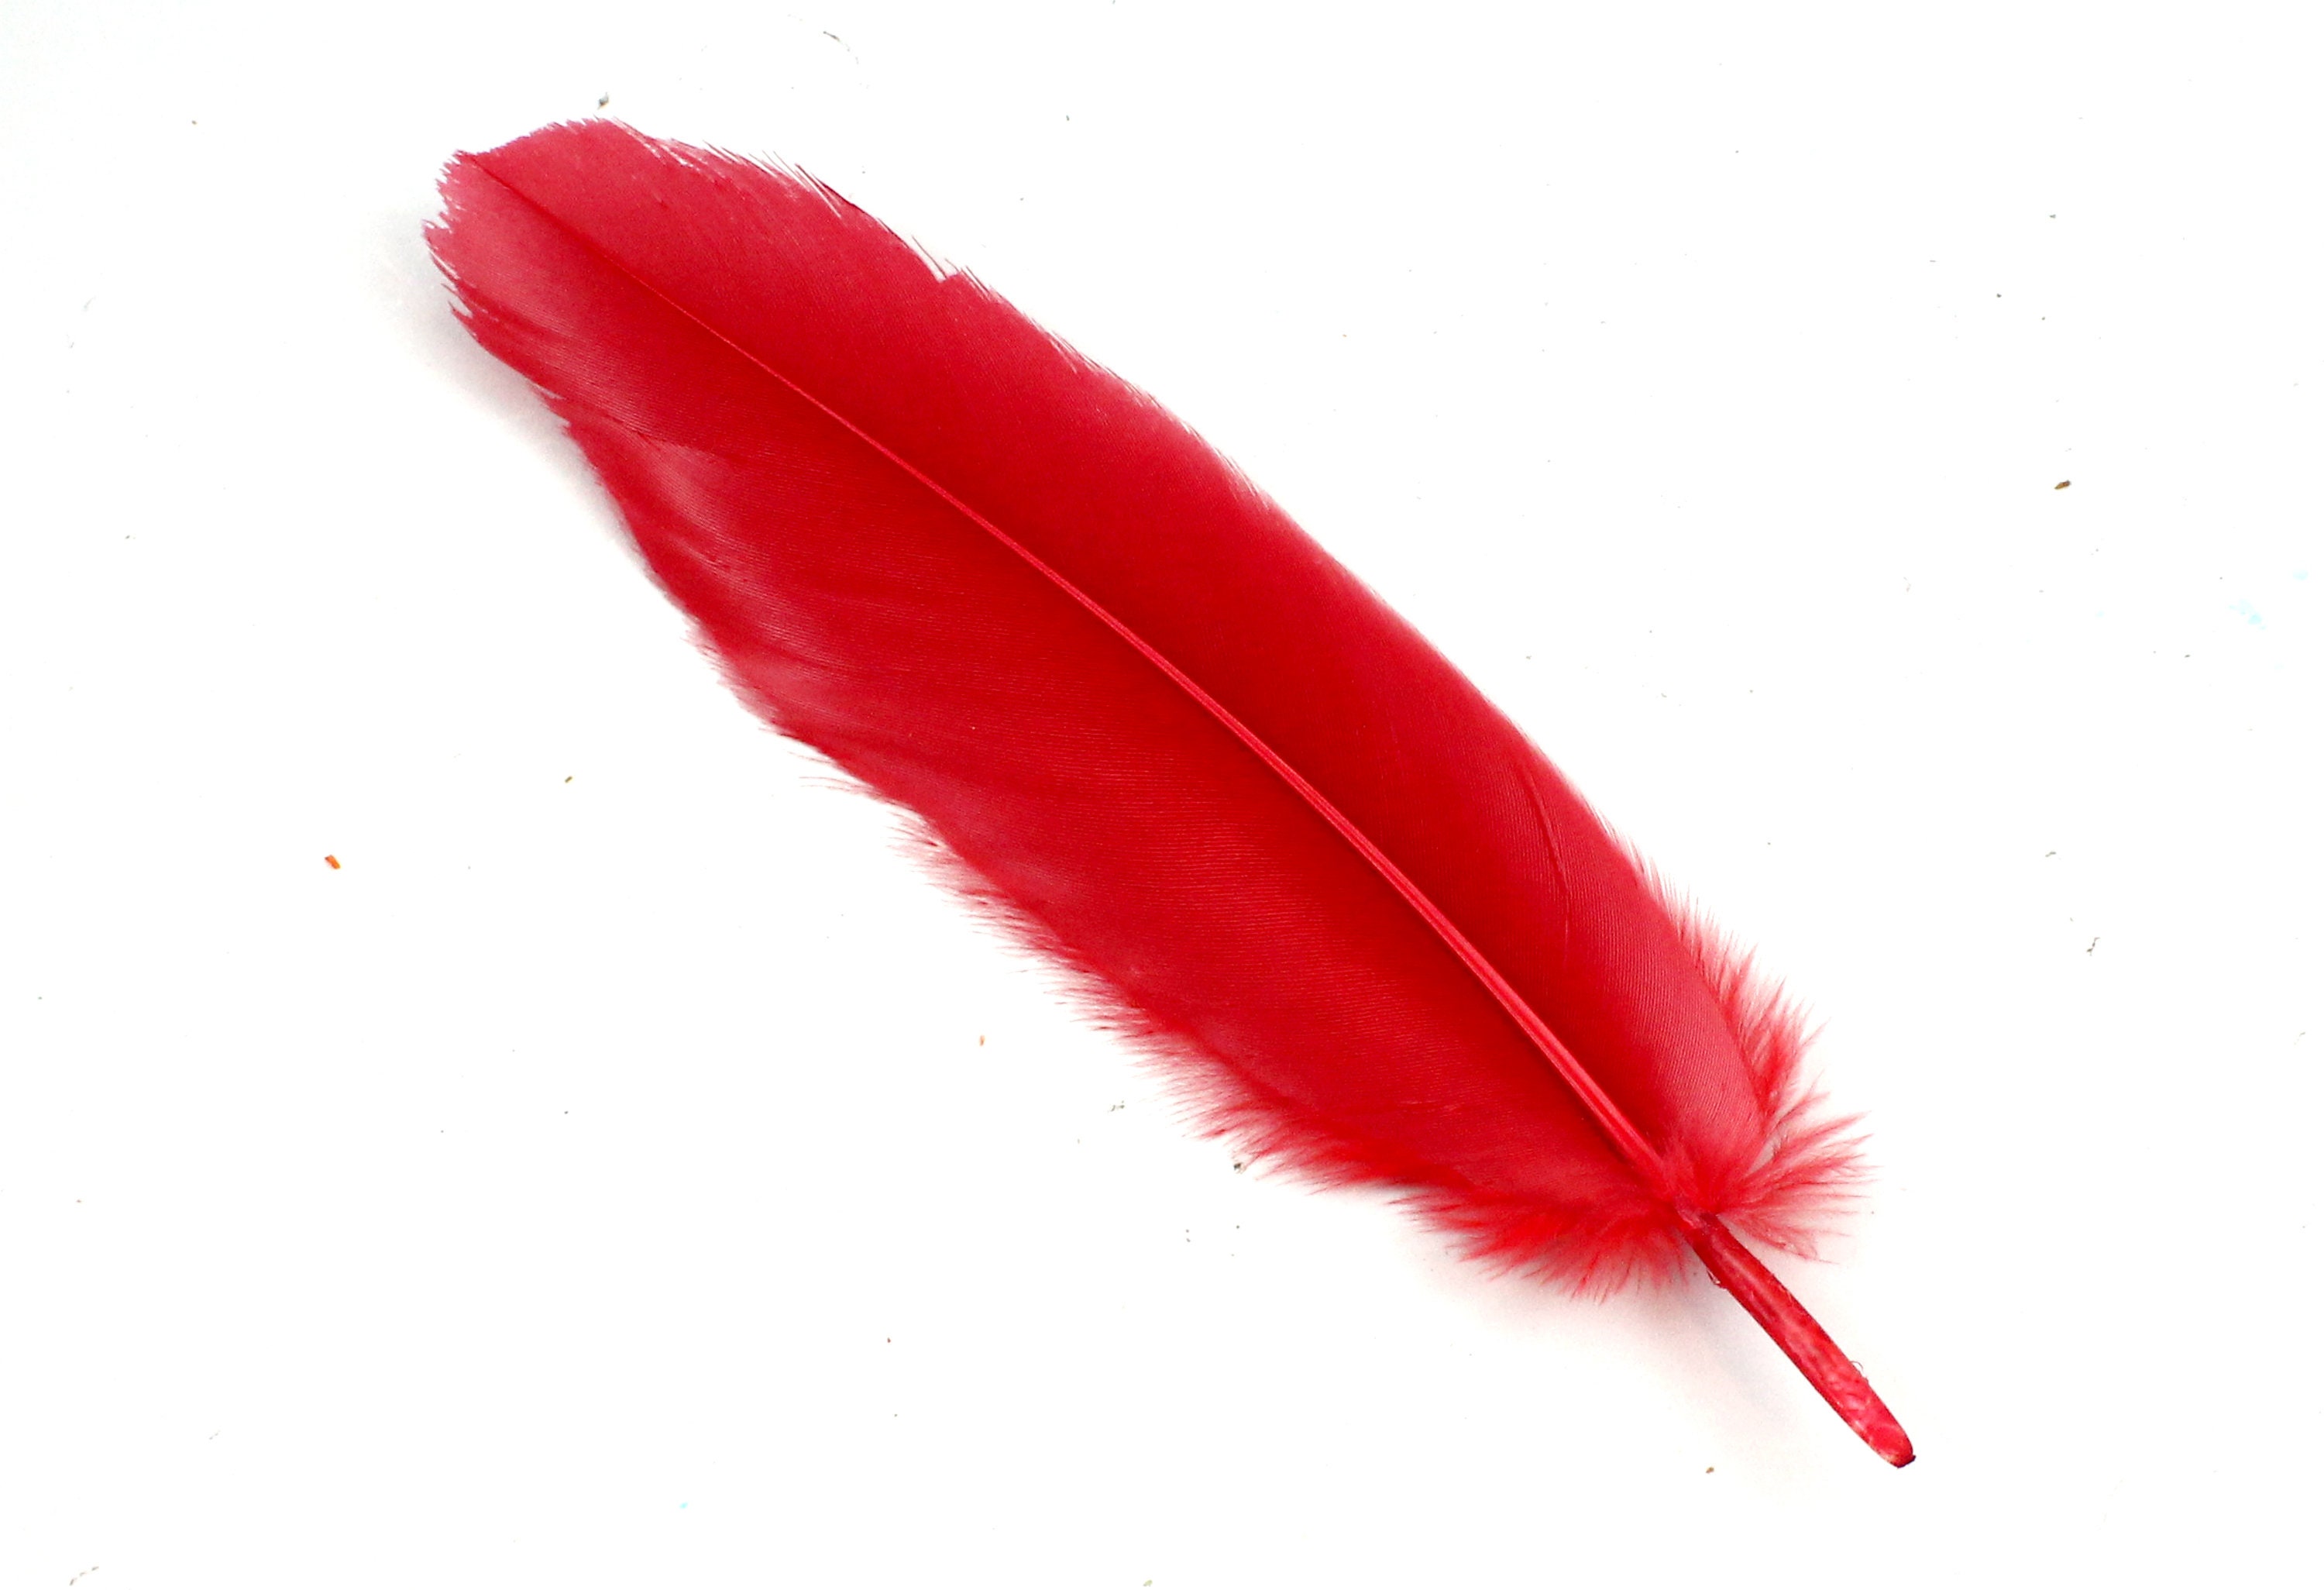 7-9 Inch Red Goose Feathers 10 Cardinal Colored Bird Decorations With Flat  Tops and Fuzzy Bottoms. A Long Curved Plume for Making Masks 